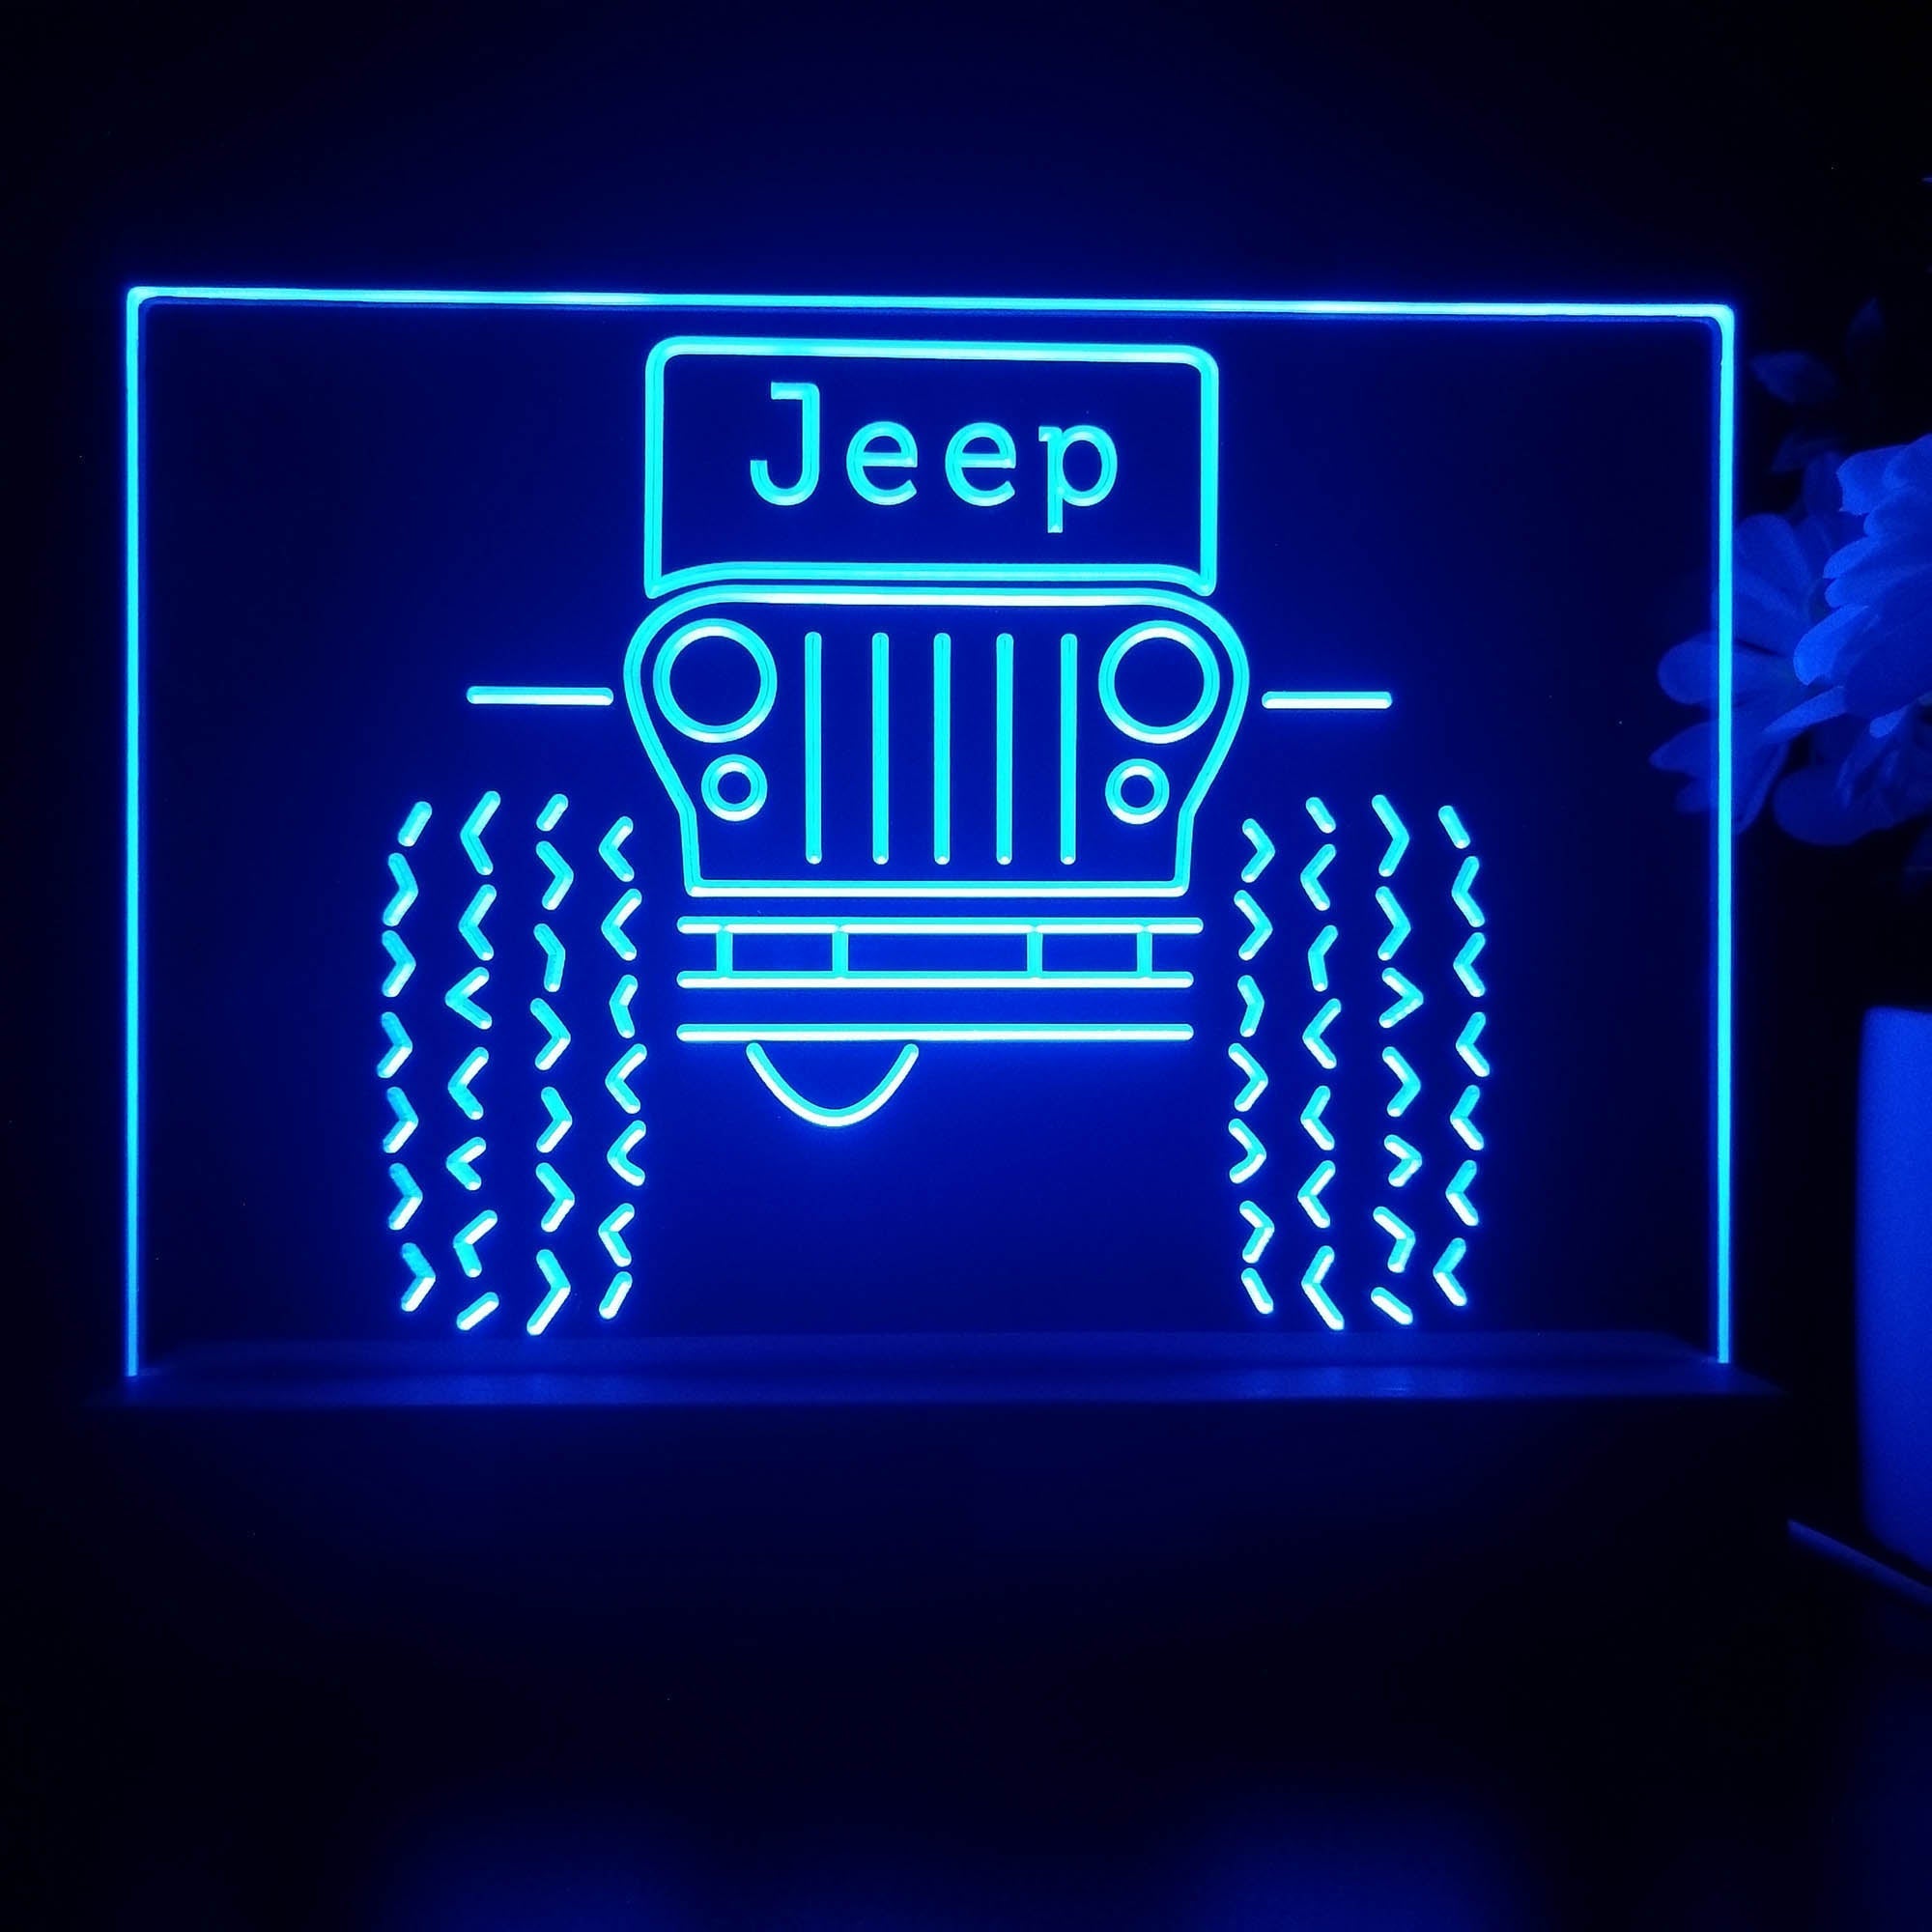 Only in a Jeep Truck Garage 3D Illusion Night Light Desk Lamp